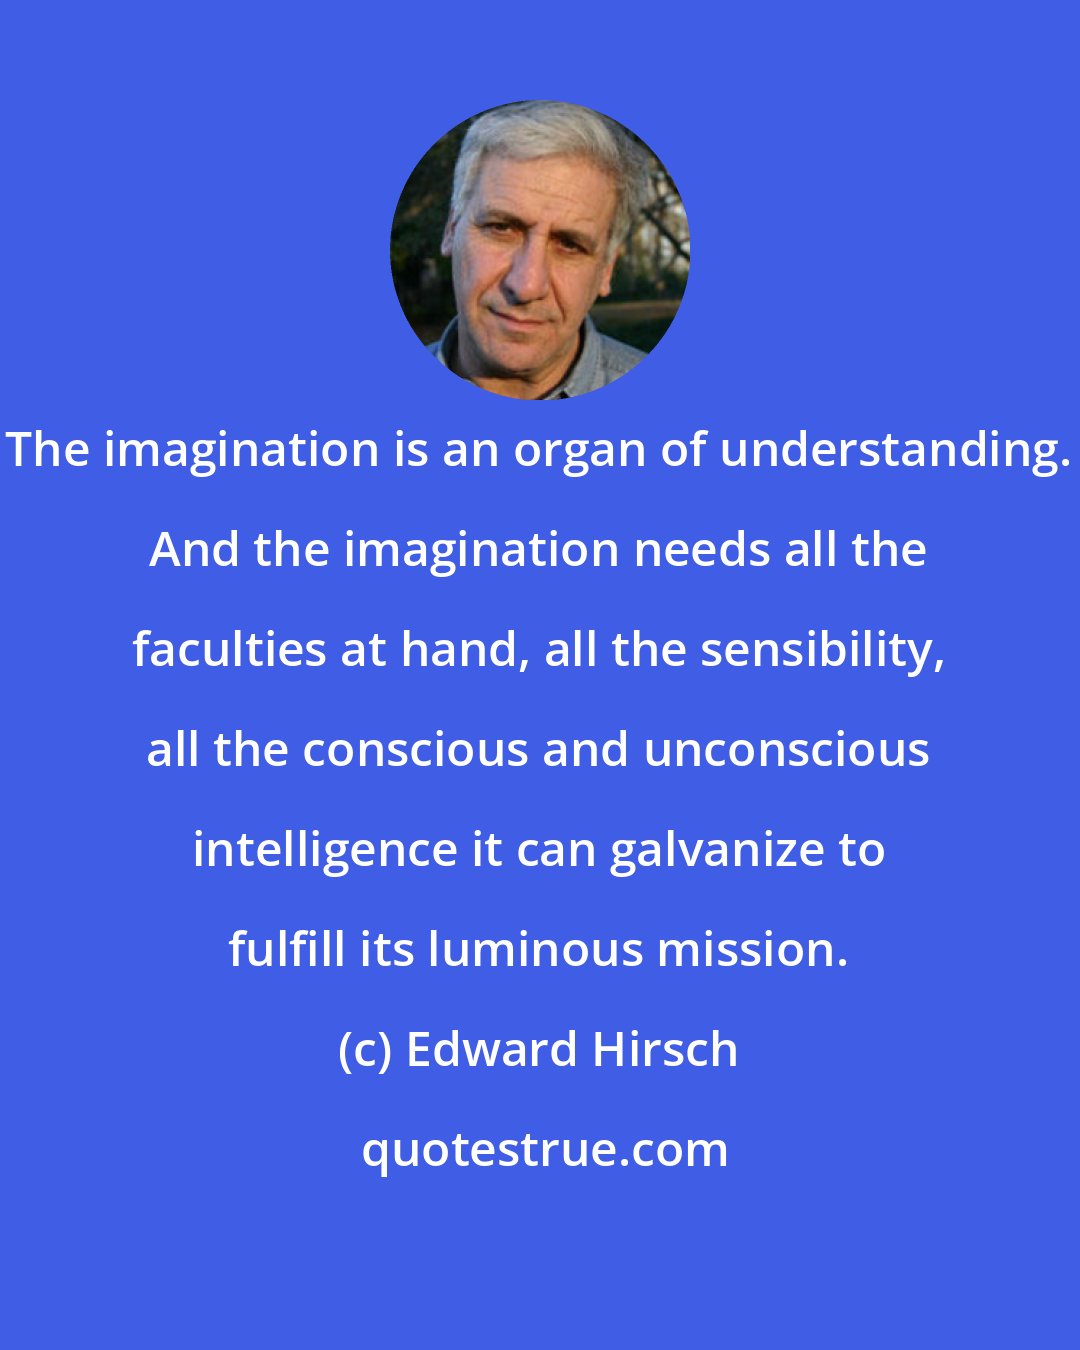 Edward Hirsch: The imagination is an organ of understanding. And the imagination needs all the faculties at hand, all the sensibility, all the conscious and unconscious intelligence it can galvanize to fulfill its luminous mission.